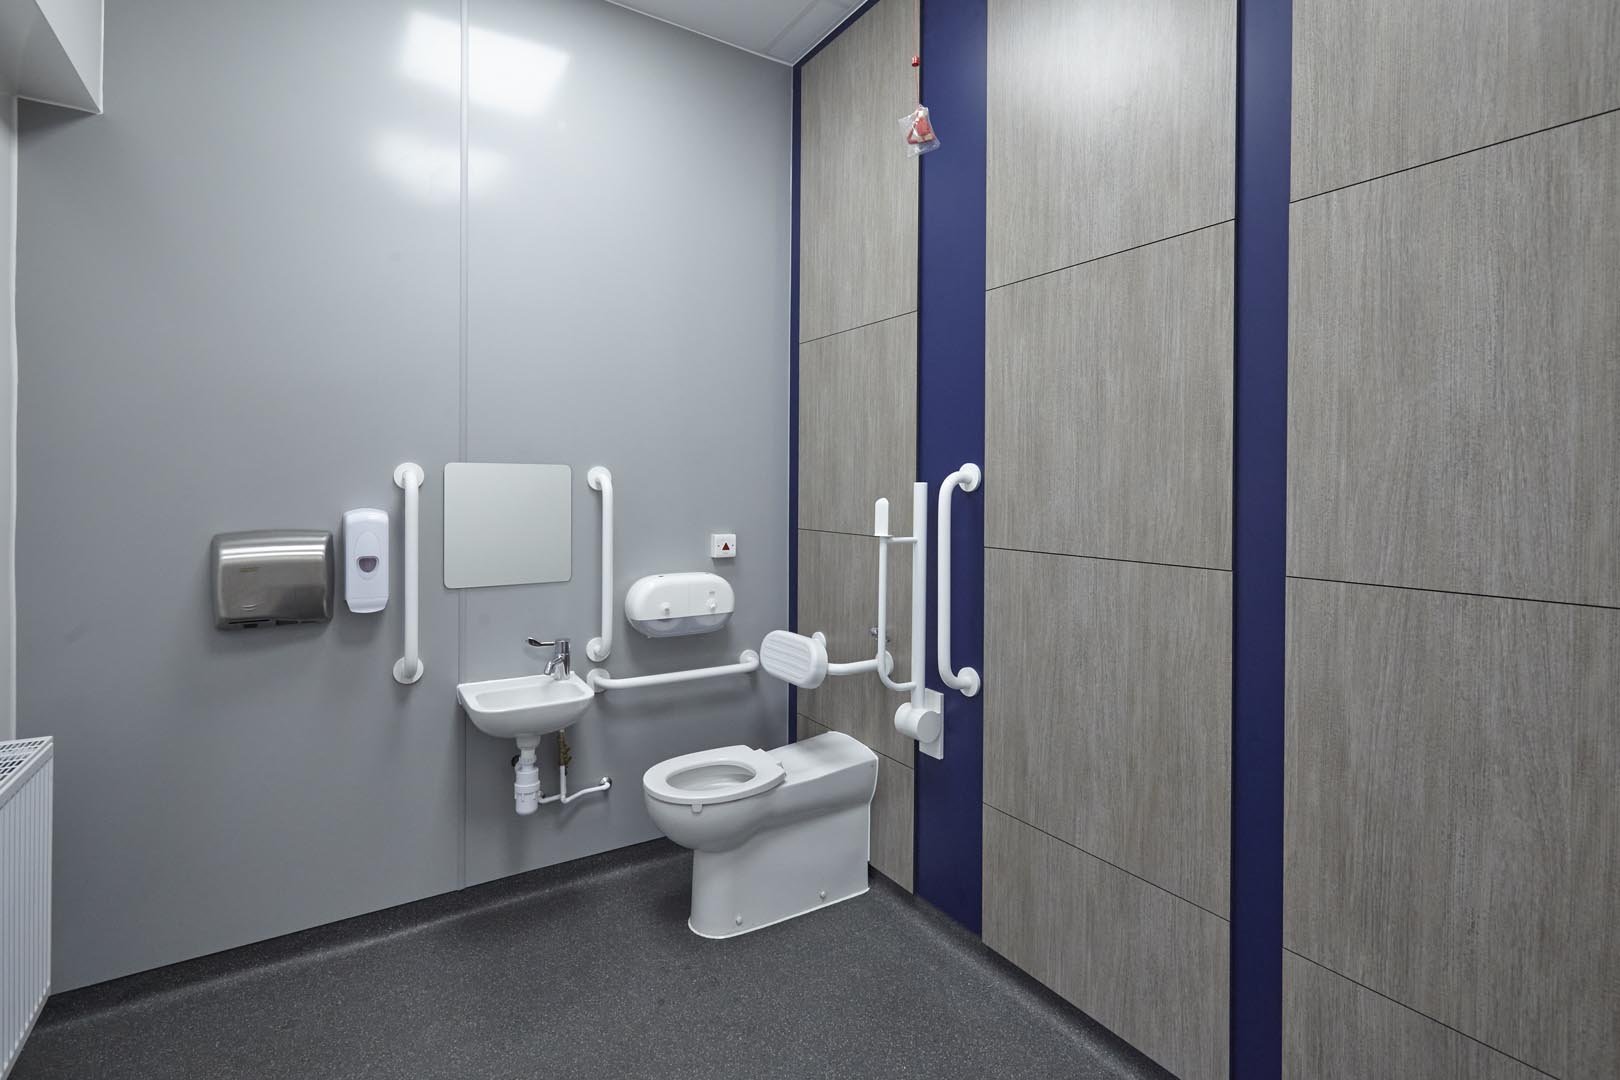 Doc M disabled toilet in navy and grey at collingwood college.jpg